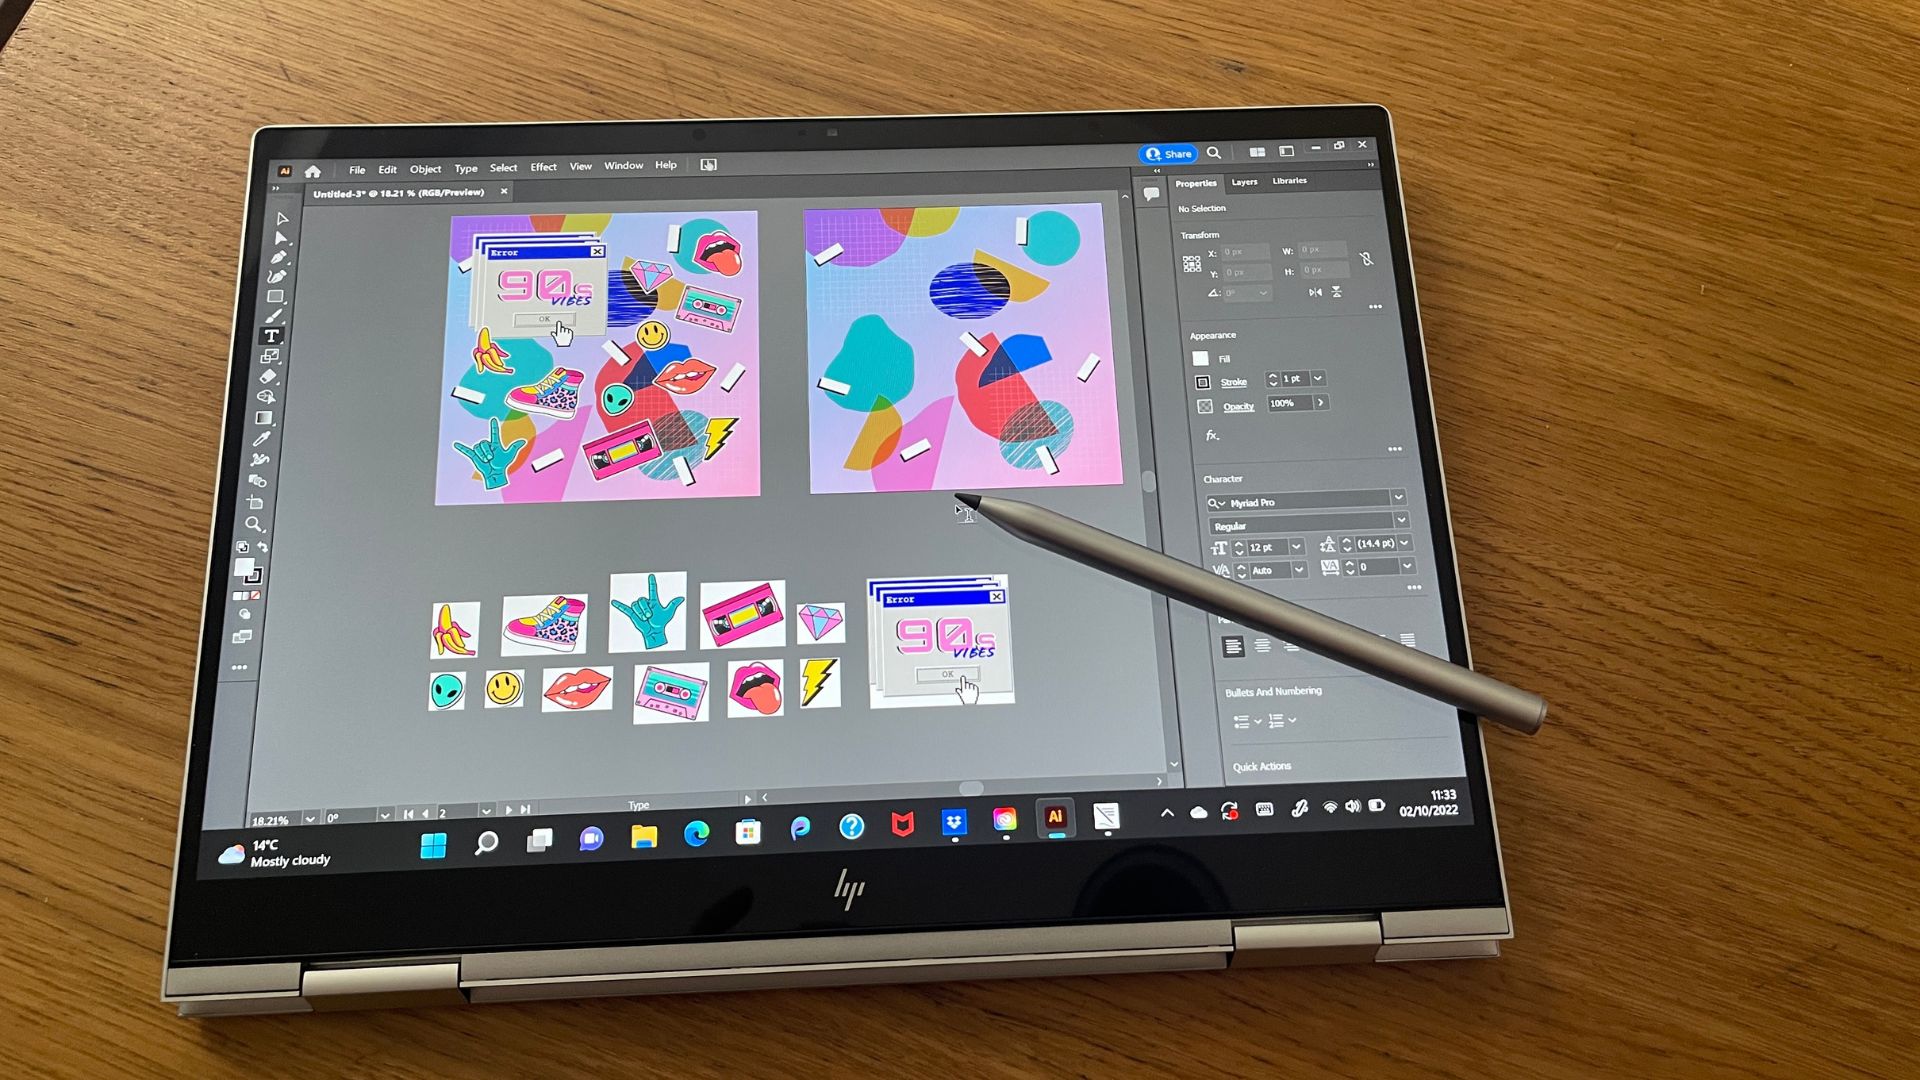 Product shot of the HP Envy x360, one of the best 2-in-1 laptops